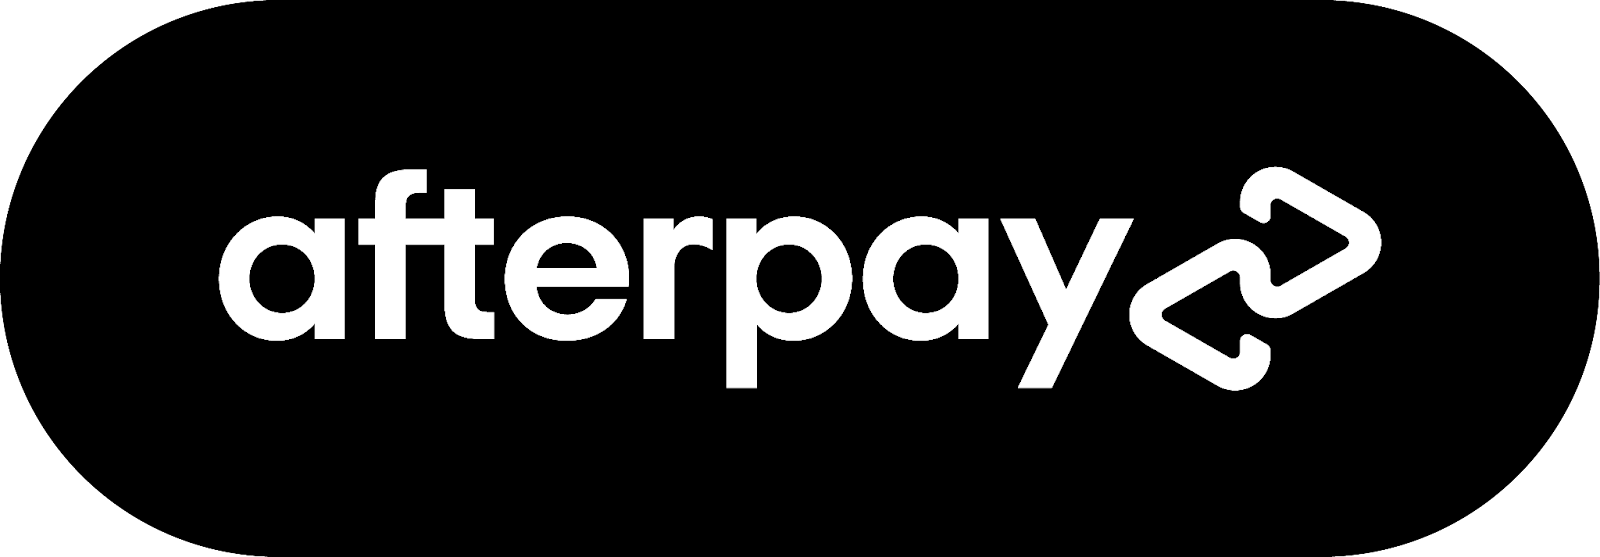 Is Sezzle better than Afterpay?